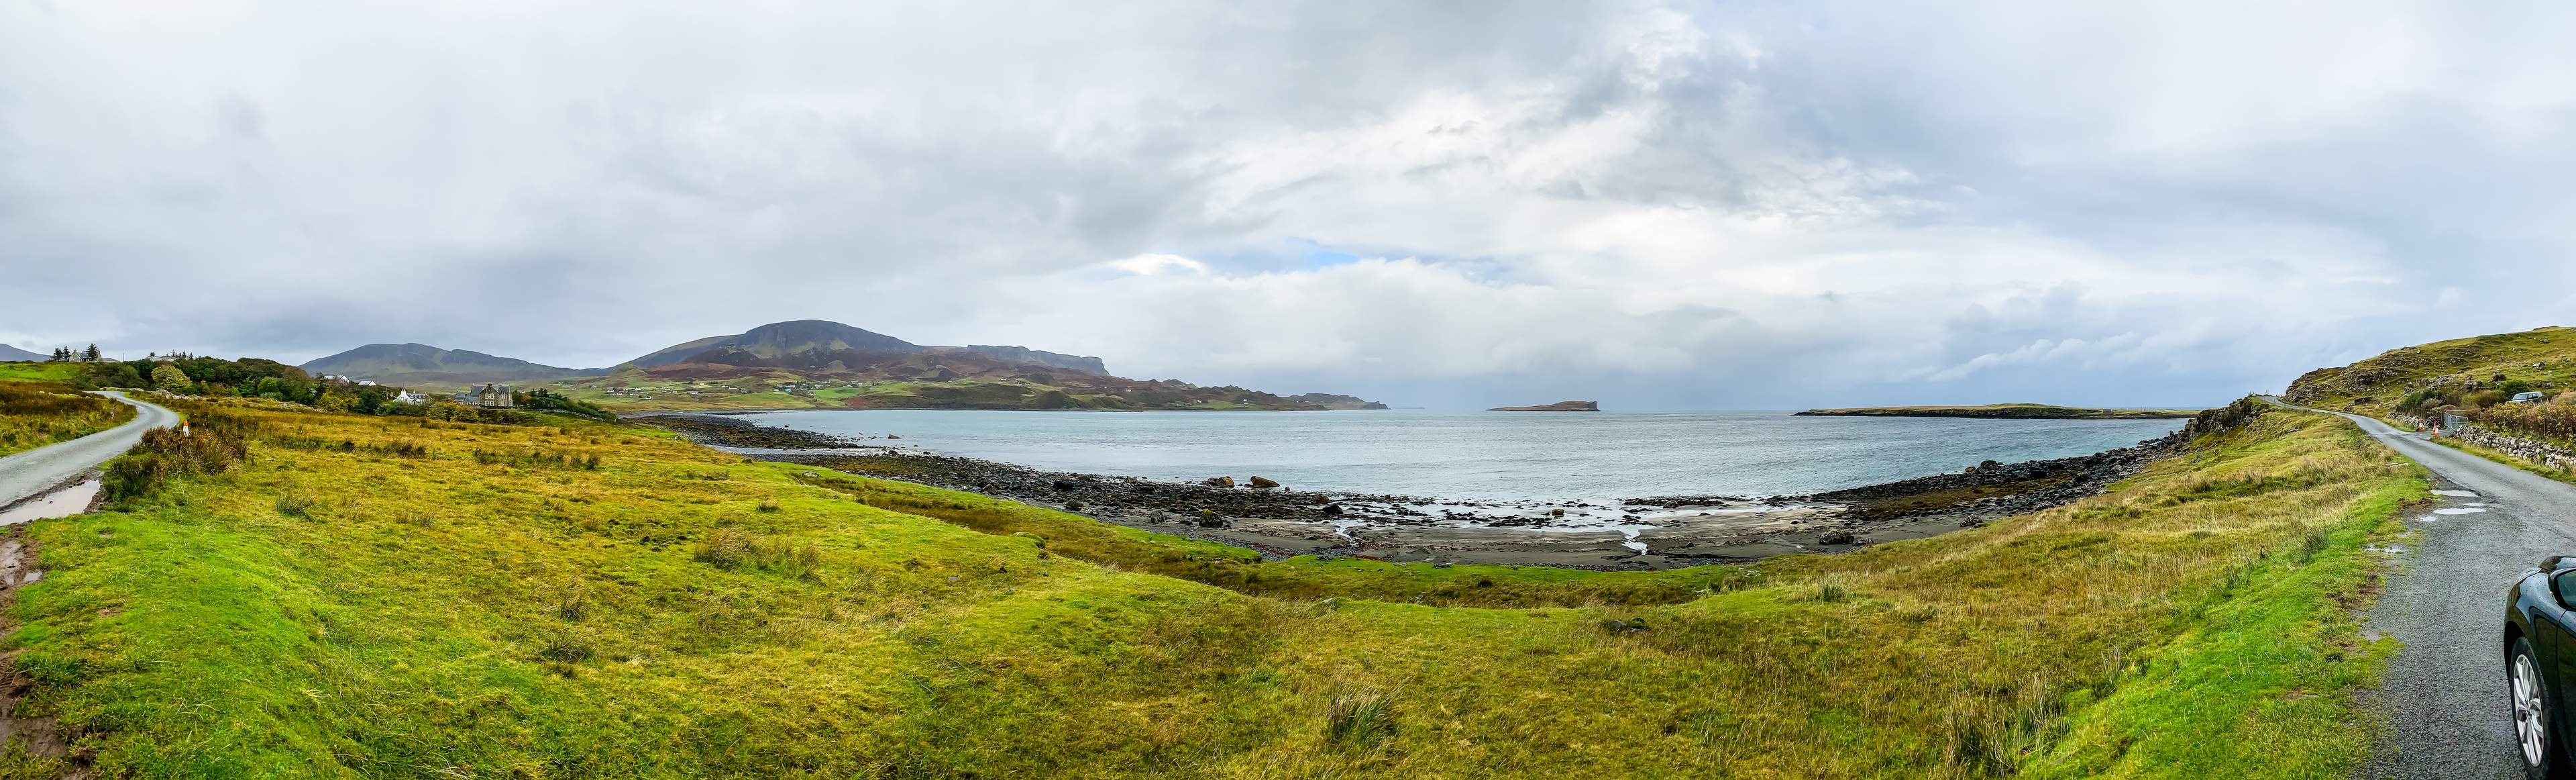 A panoramic view of Staffin Bay from the road leading to An Corran Beach, Isle of Skye, Scotland, UK